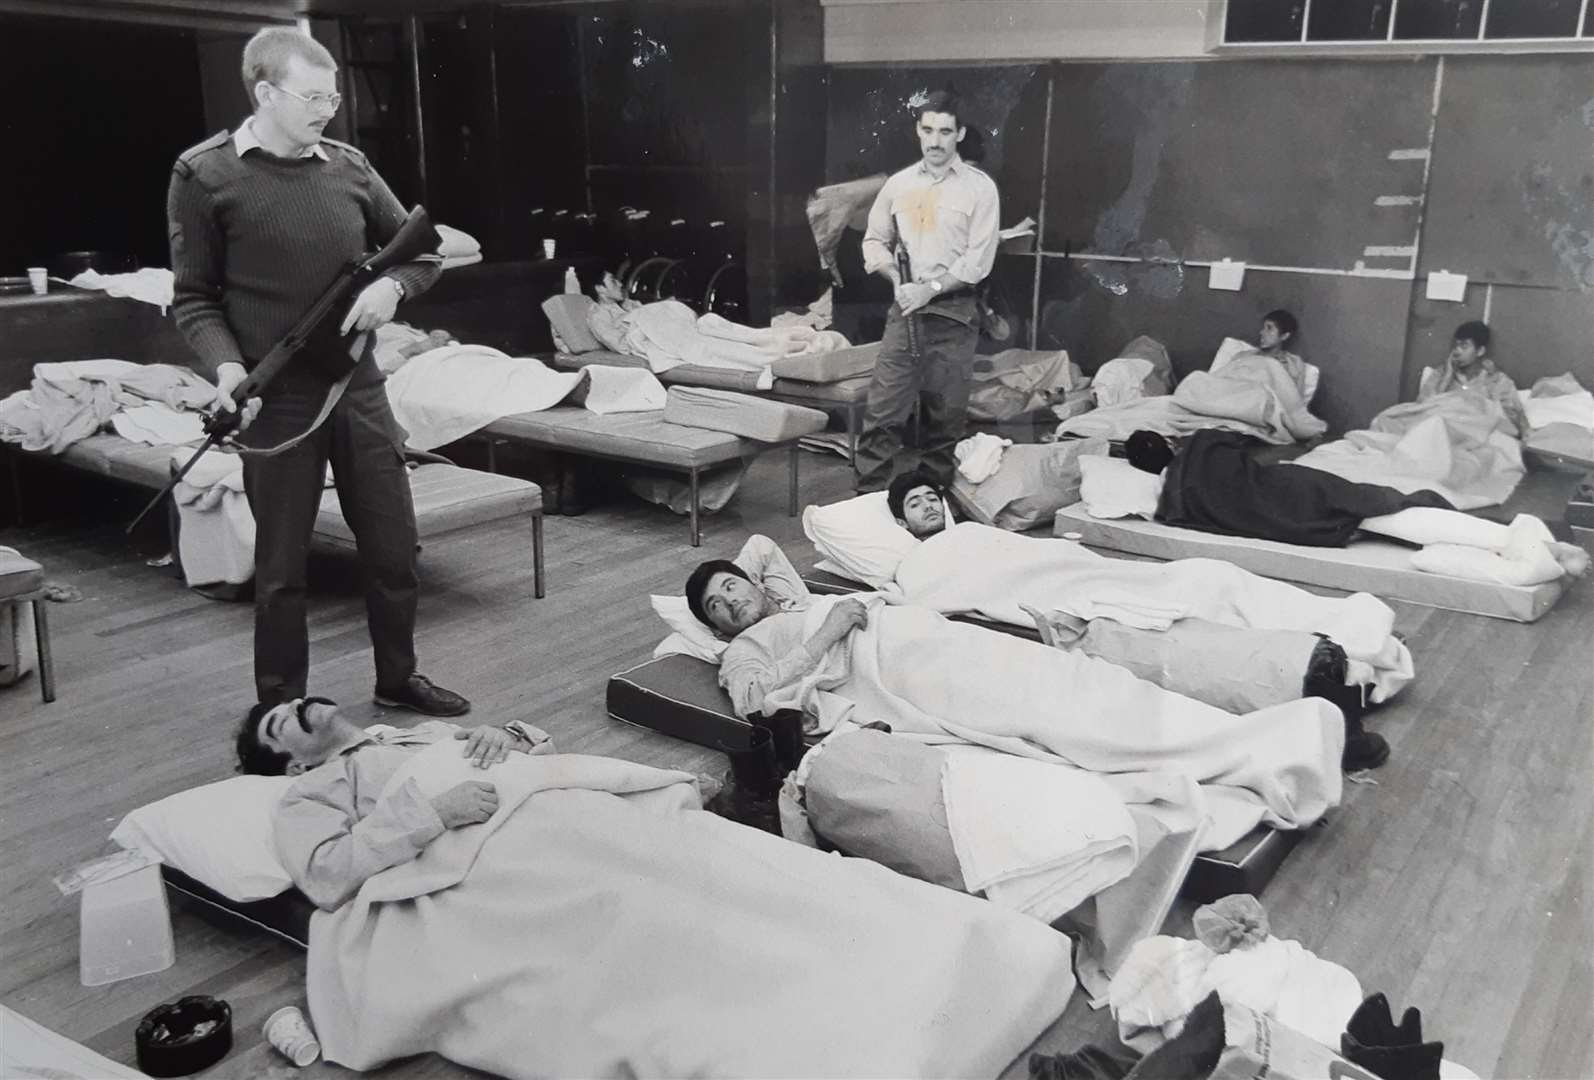 Brian Short, left, guarding Argentinian wounded prisoners in 1982. From his book The Band That Went to War